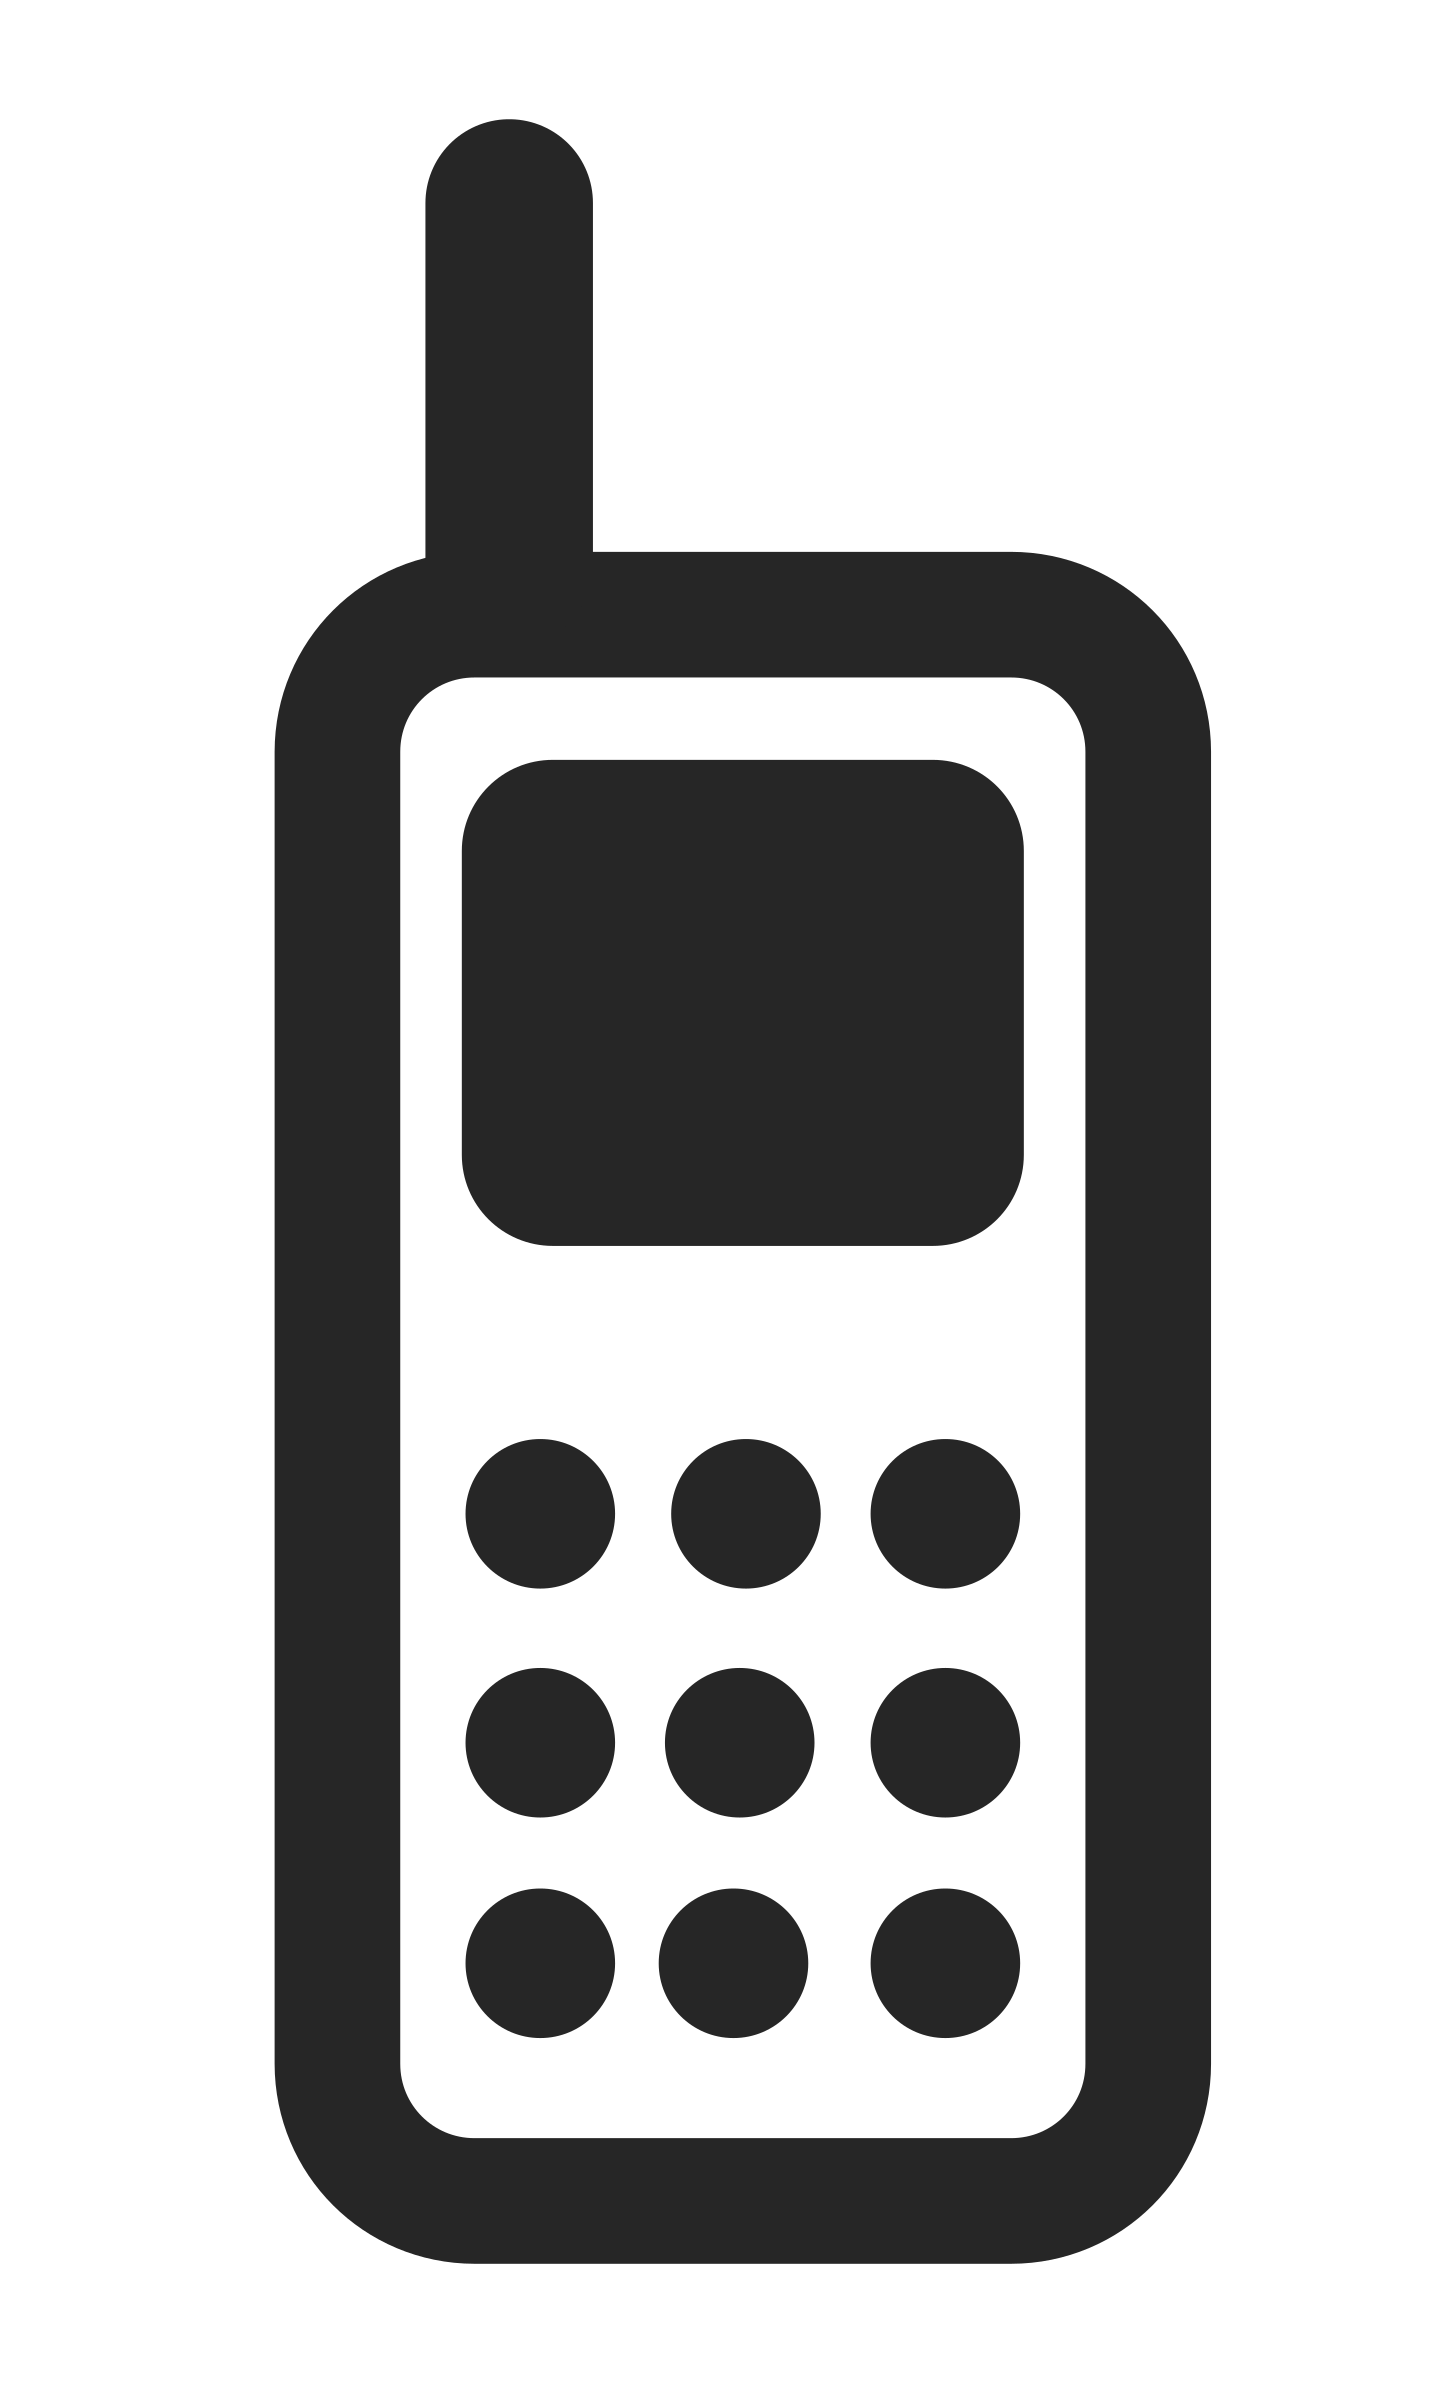 mobile phone clipart images - photo #48